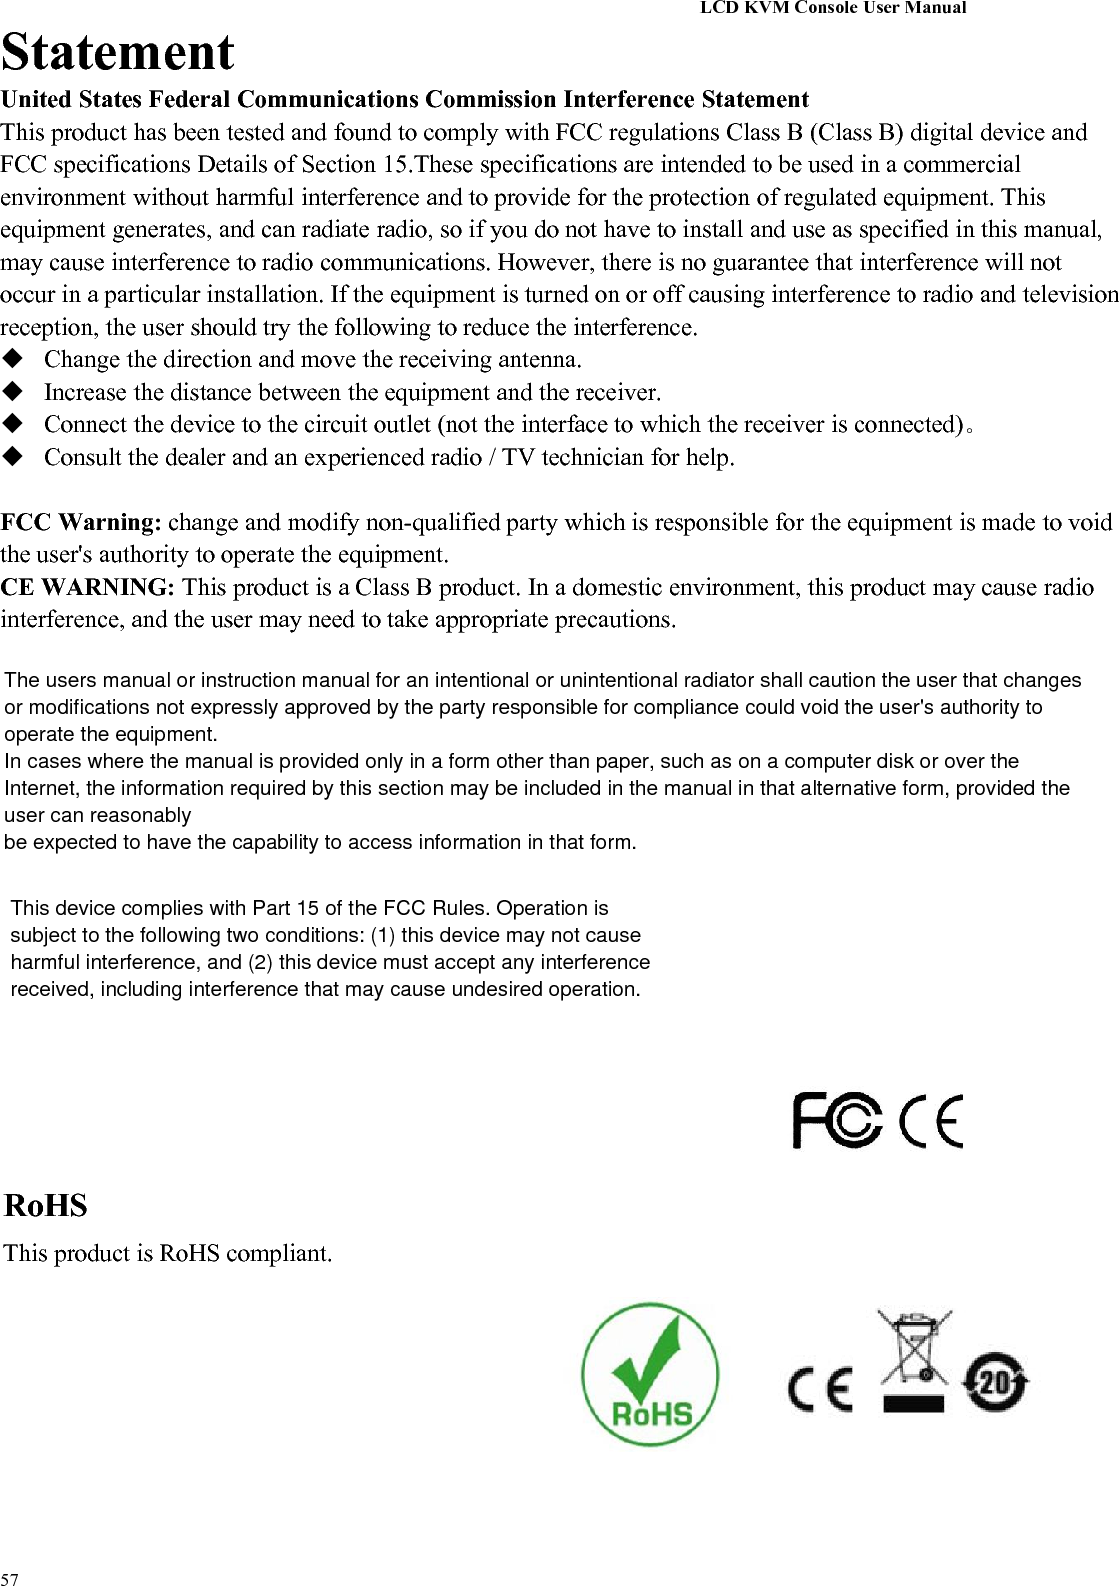 LCD KVM Console User Manual57StatementUnited States Federal Communications Commission Interference StatementThis product has been tested and found to comply with FCC regulations Class B (Class B) digital device andFCC specifications Details of Section 15.These specifications are intended to be used in a commercialenvironment without harmful interference and to provide for the protection of regulated equipment. Thisequipment generates, and can radiate radio, so if you do not have to install and use as specified in this manual,may cause interference to radio communications. However, there is no guarantee that interference will notoccur in a particular installation. If the equipment is turned on or off causing interference to radio and televisionreception, the user should try the following to reduce the interference.Change the direction and move the receiving antenna.Increase the distance between the equipment and the receiver.Connect the device to the circuit outlet (not the interface to which the receiver is connected)。Consult the dealer and an experienced radio / TV technician for help.FCC Warning: change and modify non-qualified party which is responsible for the equipment is made to voidthe user&apos;s authority to operate the equipment.CE WARNING: This product is a Class B product. In a domestic environment, this product may cause radiointerference, and the user may need to take appropriate precautions.RoHSThis product is RoHS compliant.The users manual or instruction manual for an intentional or unintentional radiator shall caution the user that changesor modifications not expressly approved by the party responsible for compliance could void the user&apos;s authority tooperate the equipment.In cases where the manual is provided only in a form other than paper, such as on a computer disk or over theInternet, the information required by this section may be included in the manual in that alternative form, provided theuser can reasonablybe expected to have the capability to access information in that form.This device complies with Part 15 of the FCC Rules. Operation issubject to the following two conditions: (1) this device may not causeharmful interference, and (2) this device must accept any interferencereceived, including interference that may cause undesired operation.